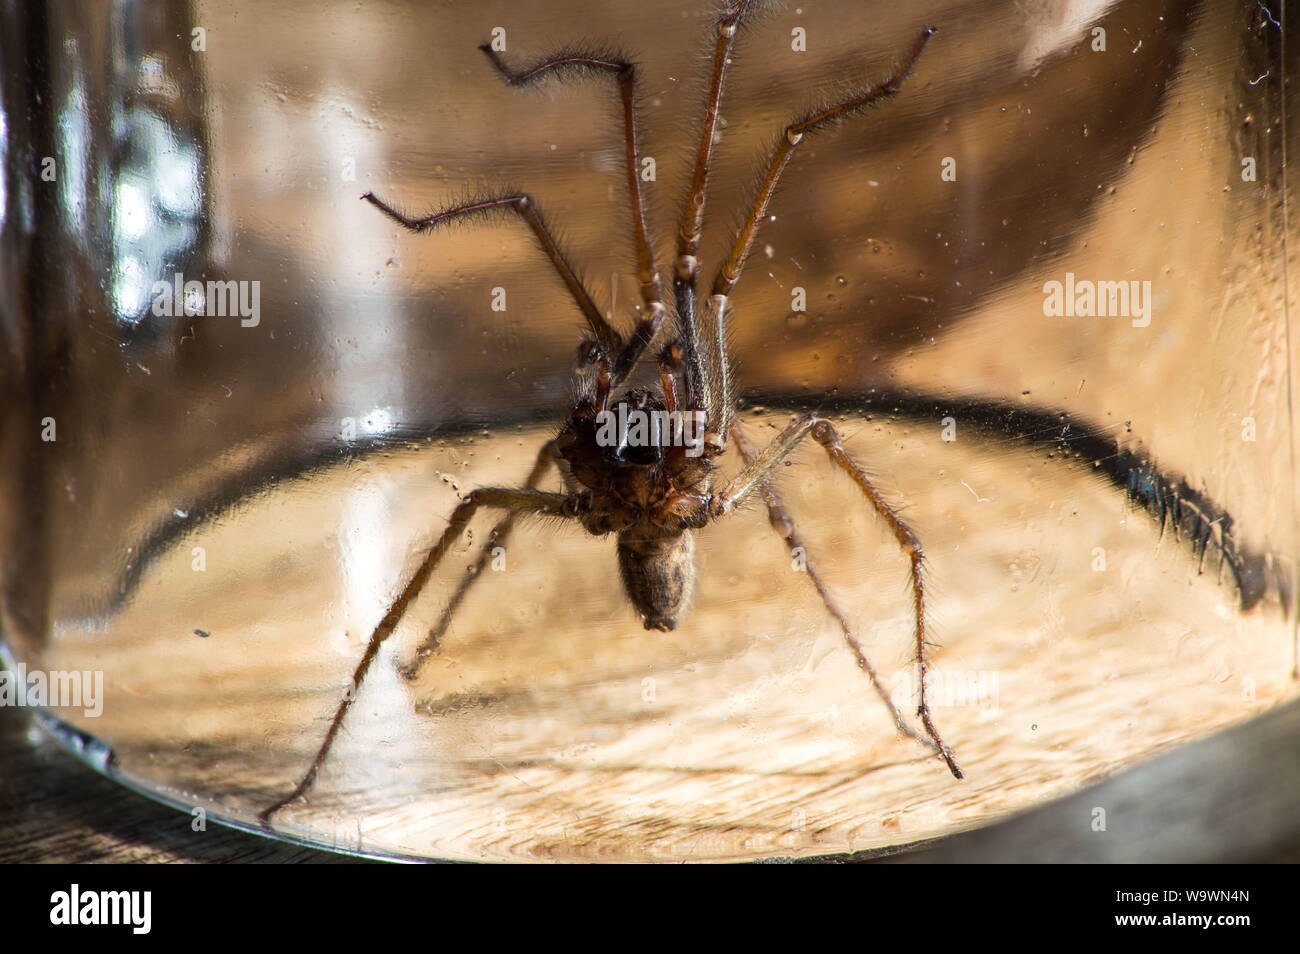 Glasgow, UK. 15 August 2019.  Its that time of year again, after a particularly hot and wet summer, providing ideal conditions for these massive spiders to grow even bigger than normal, the UK is set for a mass invasion of Giant House Spiders. Watch where you step!  Colin Fisher/CDFIMAGES.COM Credit: Colin Fisher/Alamy Live News Stock Photo